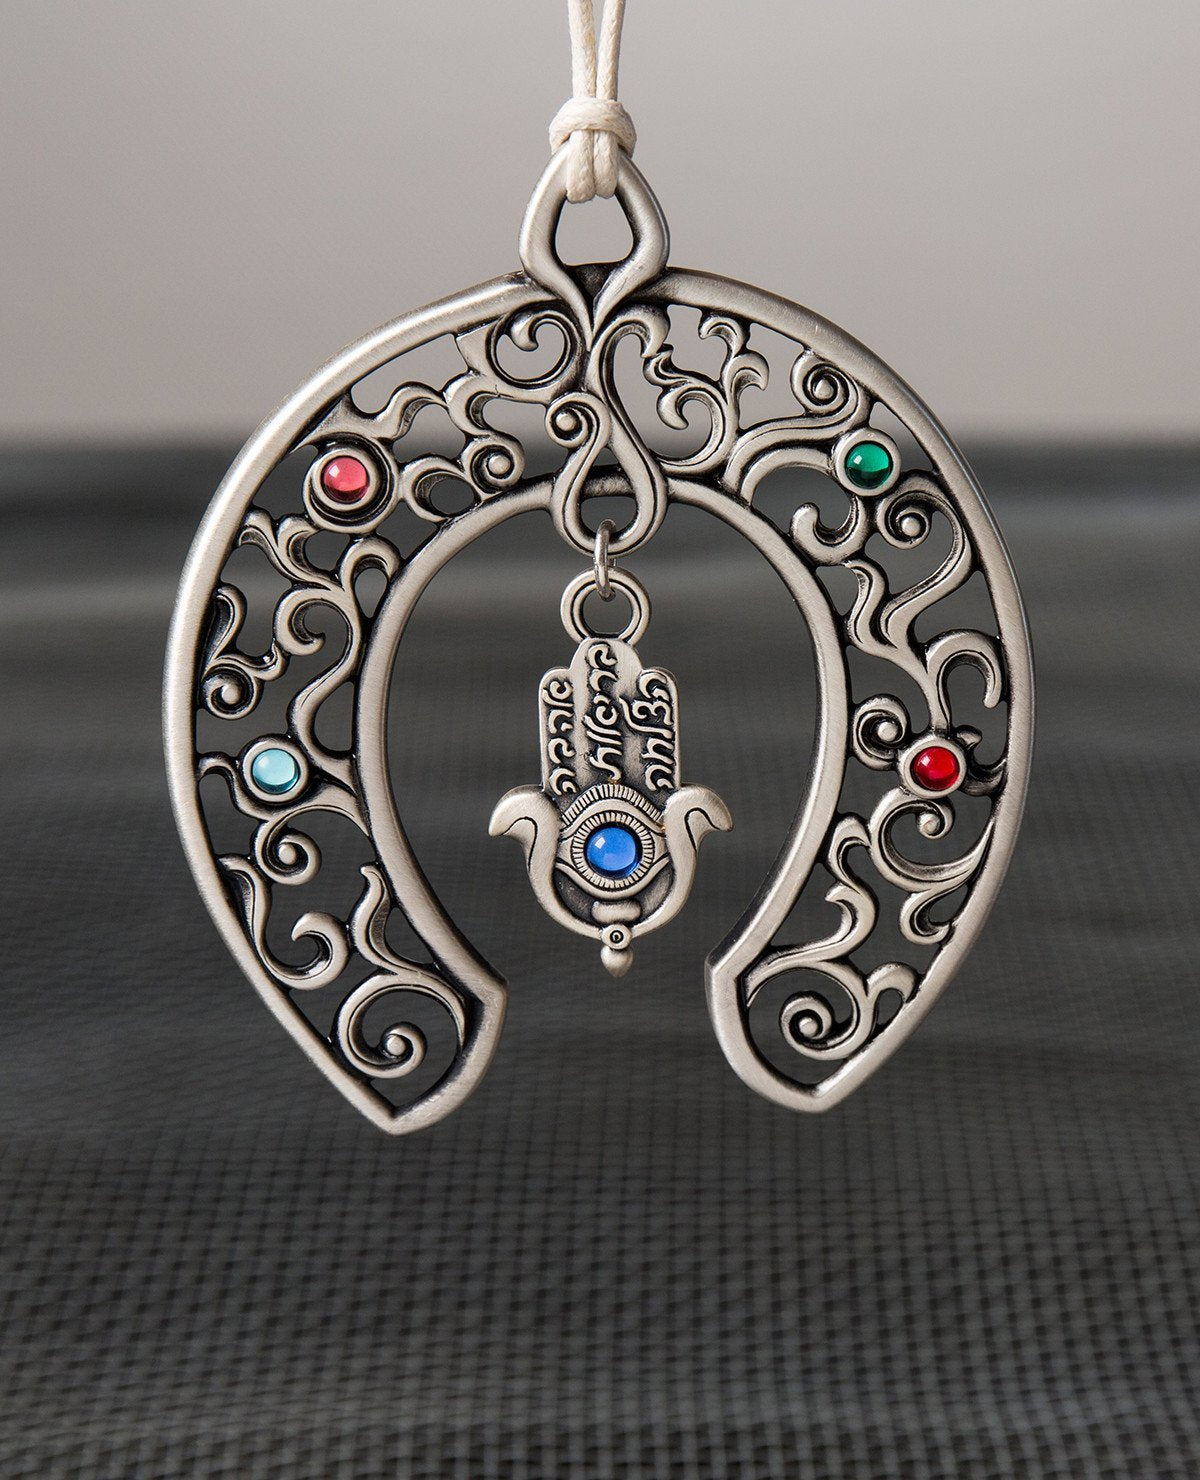 An astonishingly designed hanging horseshoe wall ornament: a large horseshoe, decorated by filigree and embedded with colorful stones. At its center hangs a designed Hamsa, which has an engraved eye on it embedded with a blue stone and the words "love", "health" and "luck". The ornament is coated in sterling silver and comes with a natural colored faux leather string for hanging. The horseshoe and the Hamsa are both well known charms to ward off the "evil eye", and also bring blessings of abundance and good